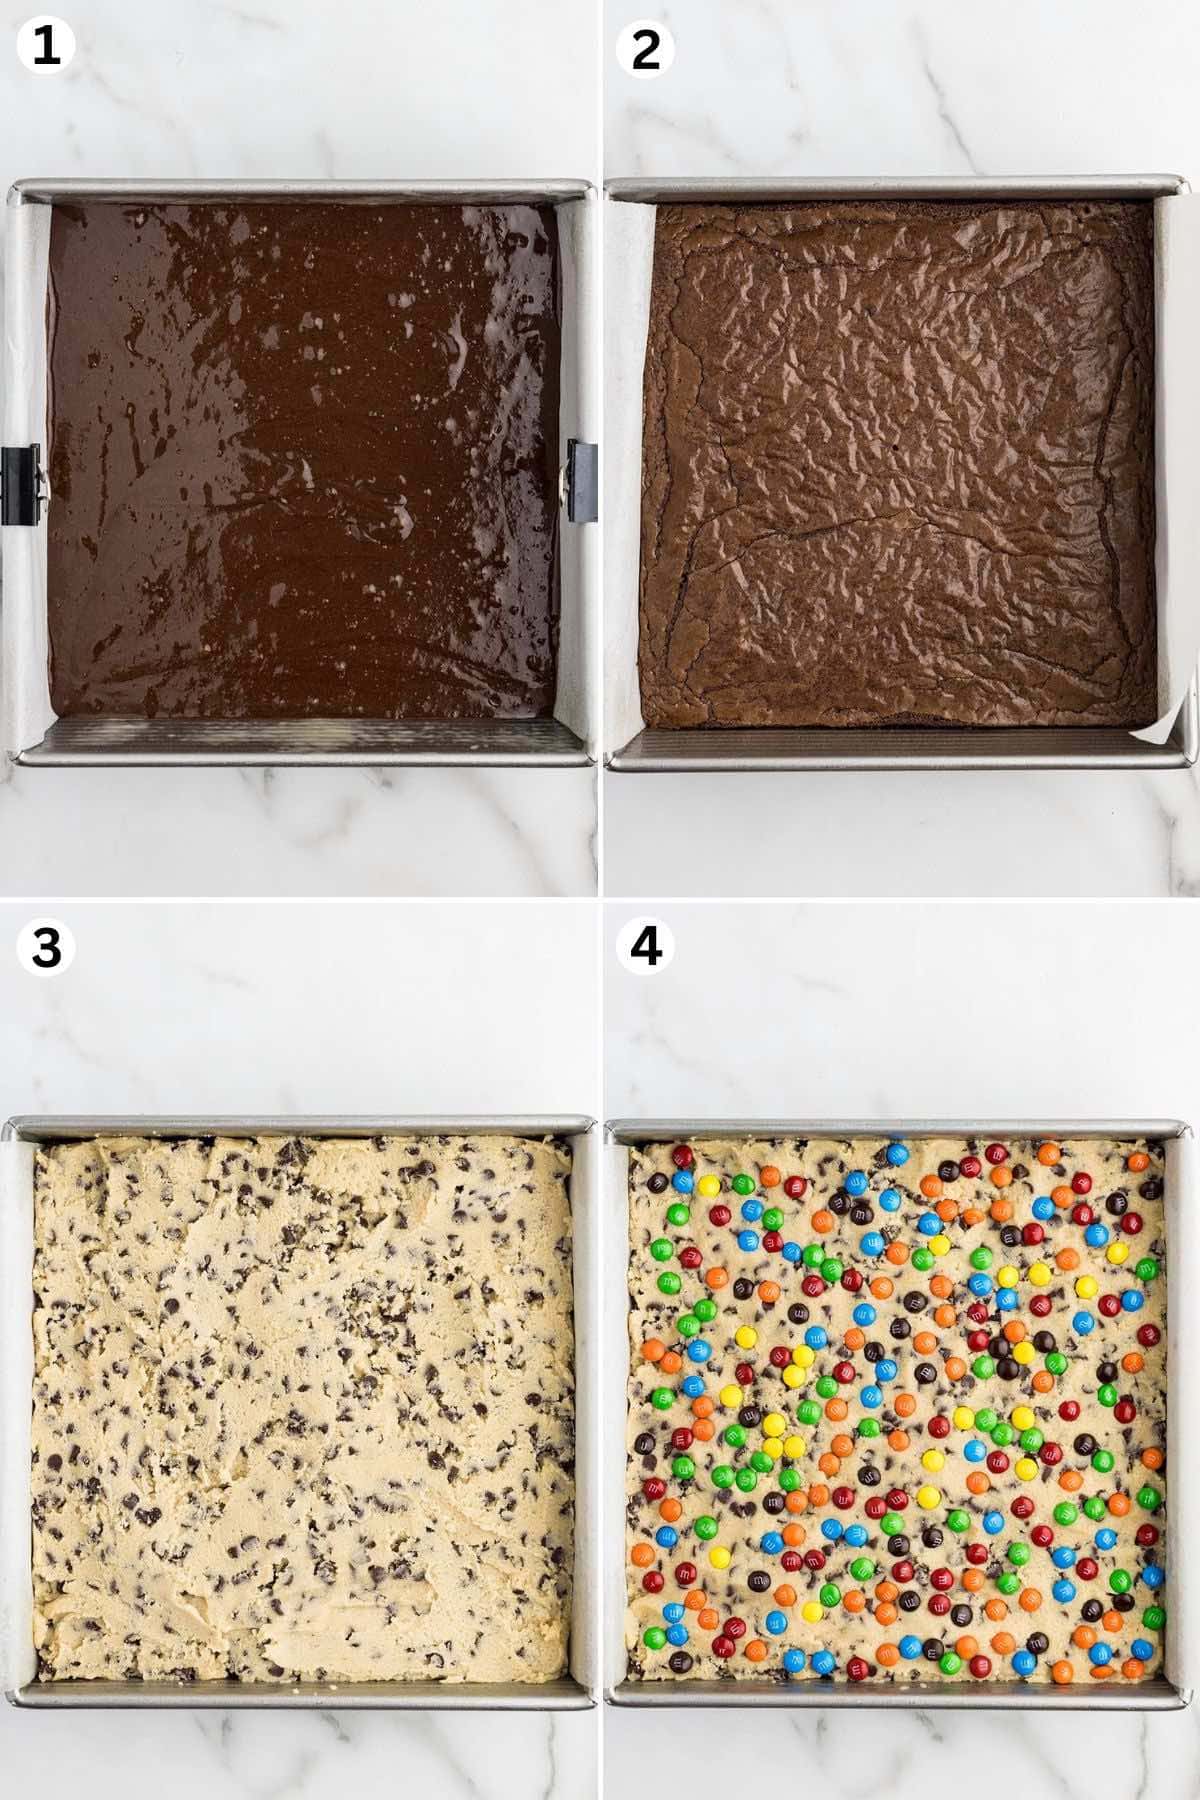 Spread the brownie batter into an even layer in the prepared baking pan. Bake. Spread the cookie dough on top of the brownies. Sprinkle the M&M's and press them down.